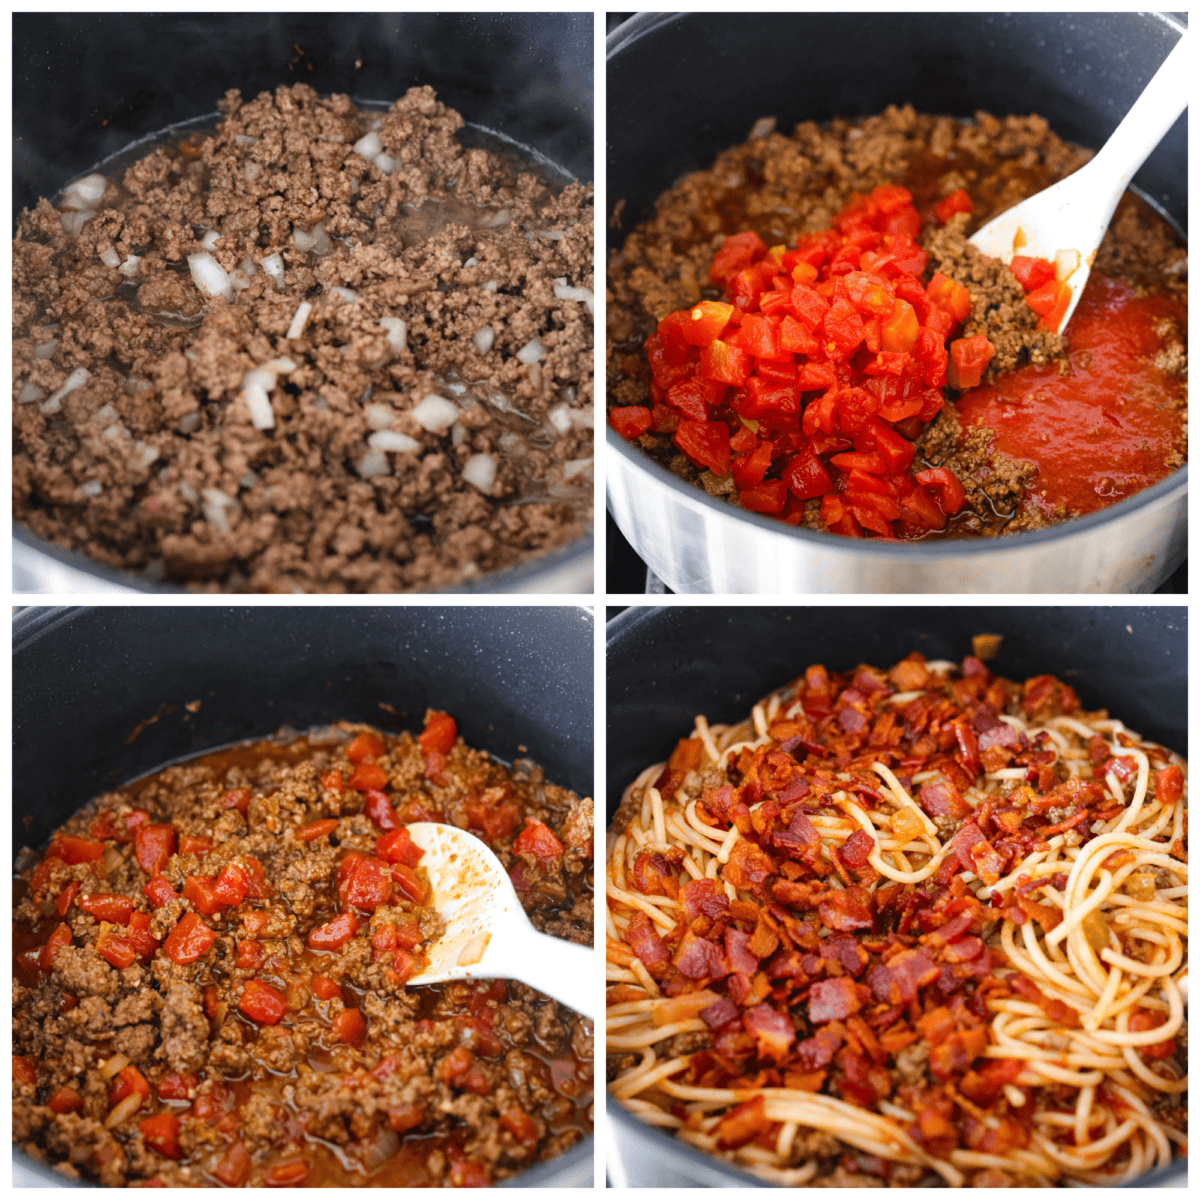 4-photo collage of the ground beef mixture being prepared and combined with the pasta.